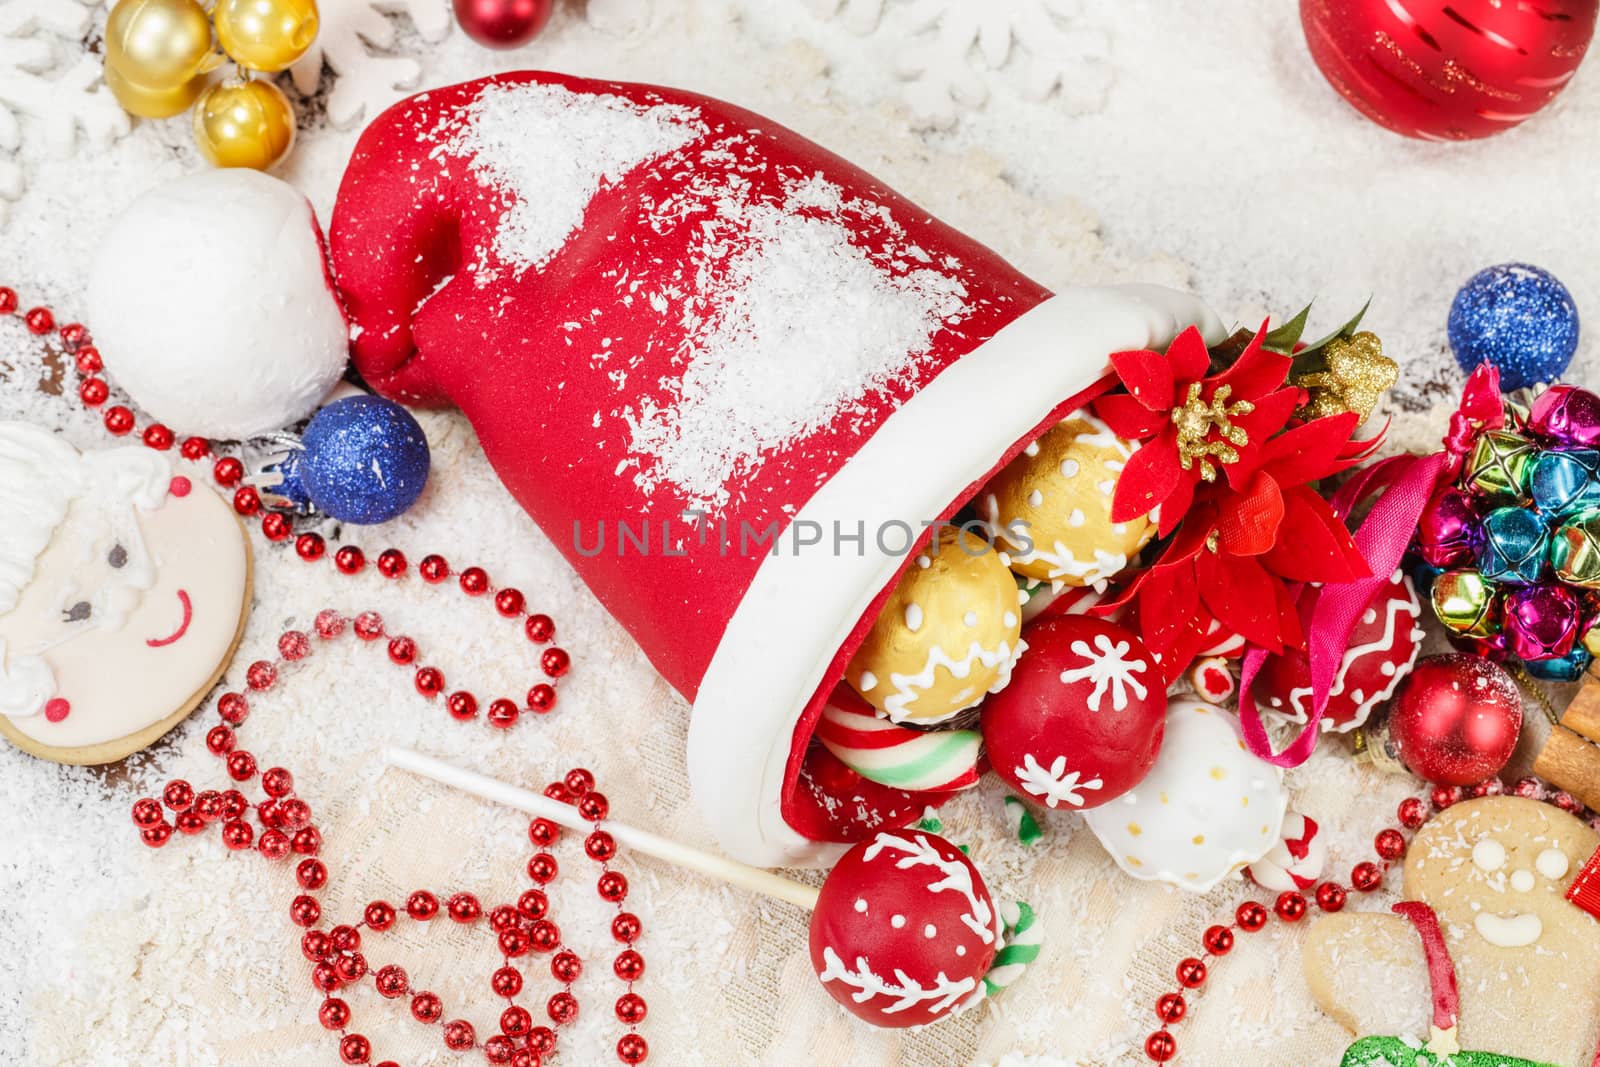 Sweet Sugar Santa Hat, decorated with festive royal icing and Christmas cookies on festive table. Selective focus